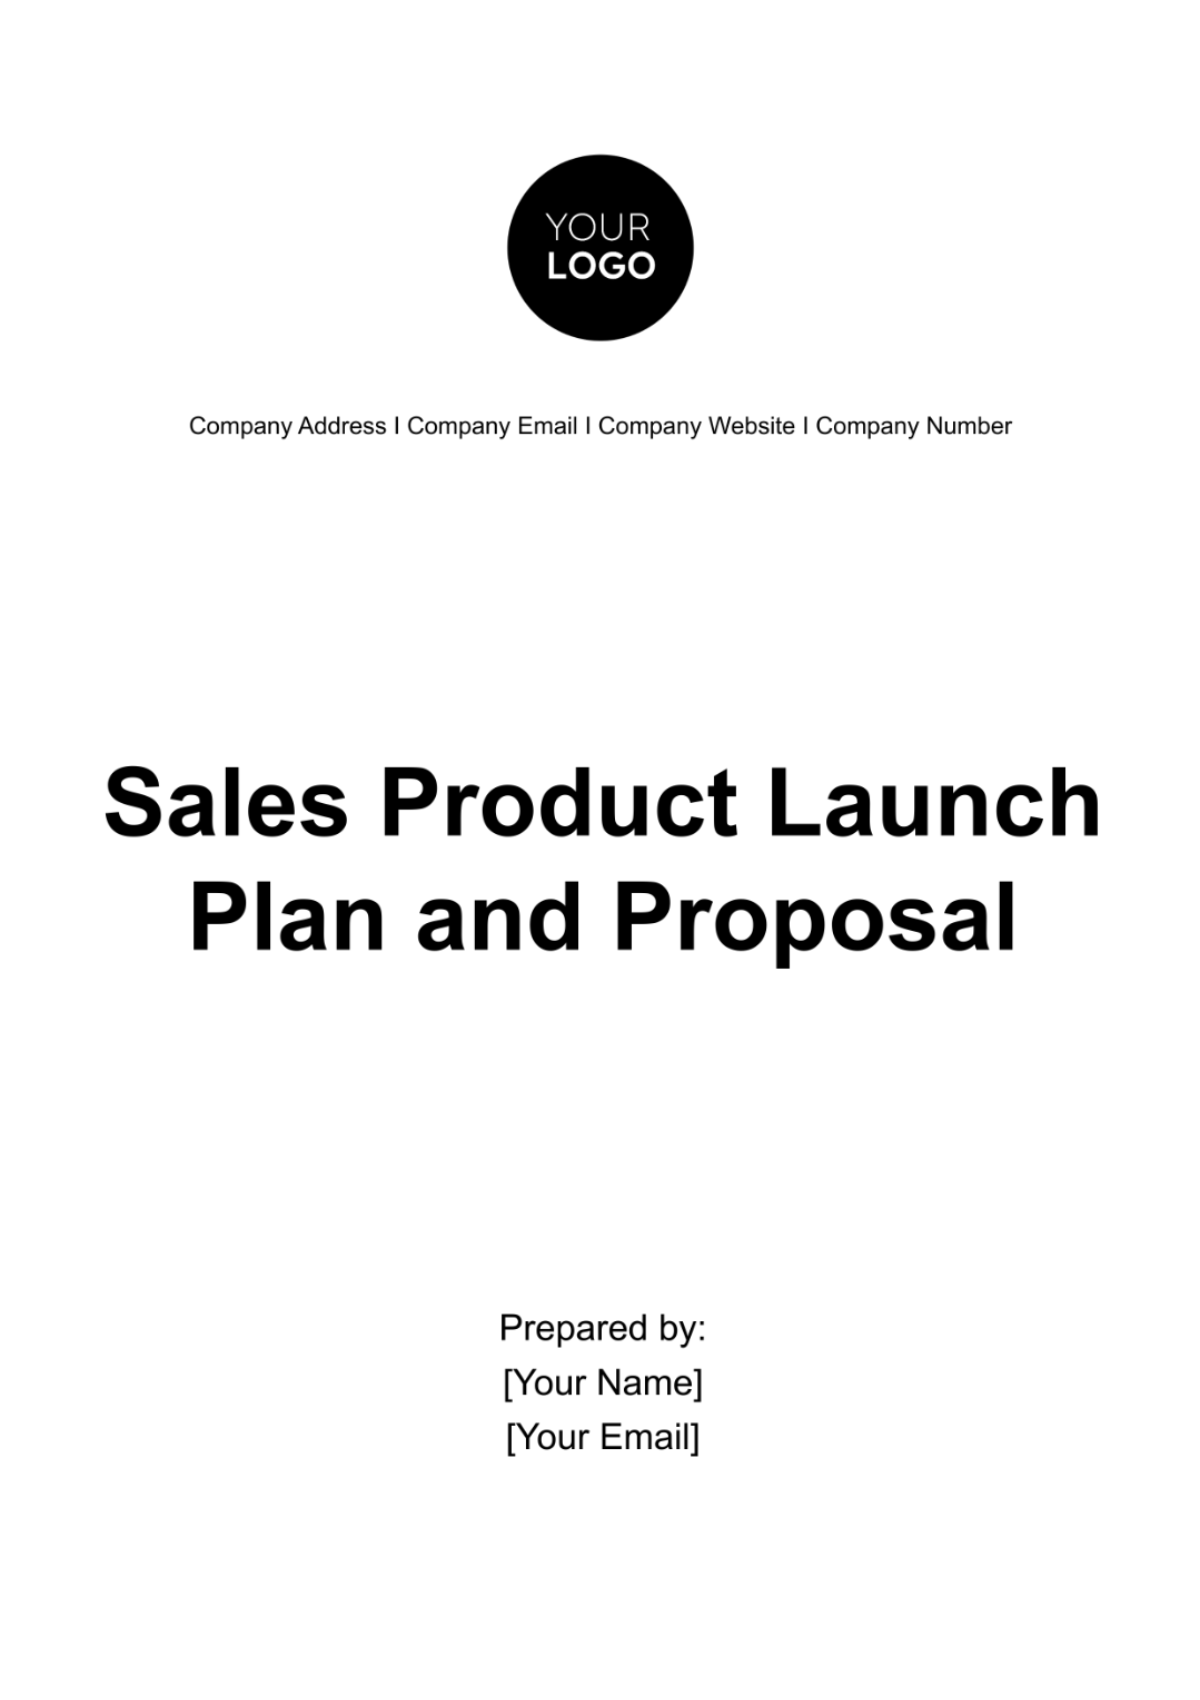 Free Sales Product Launch Plan and Proposal Template